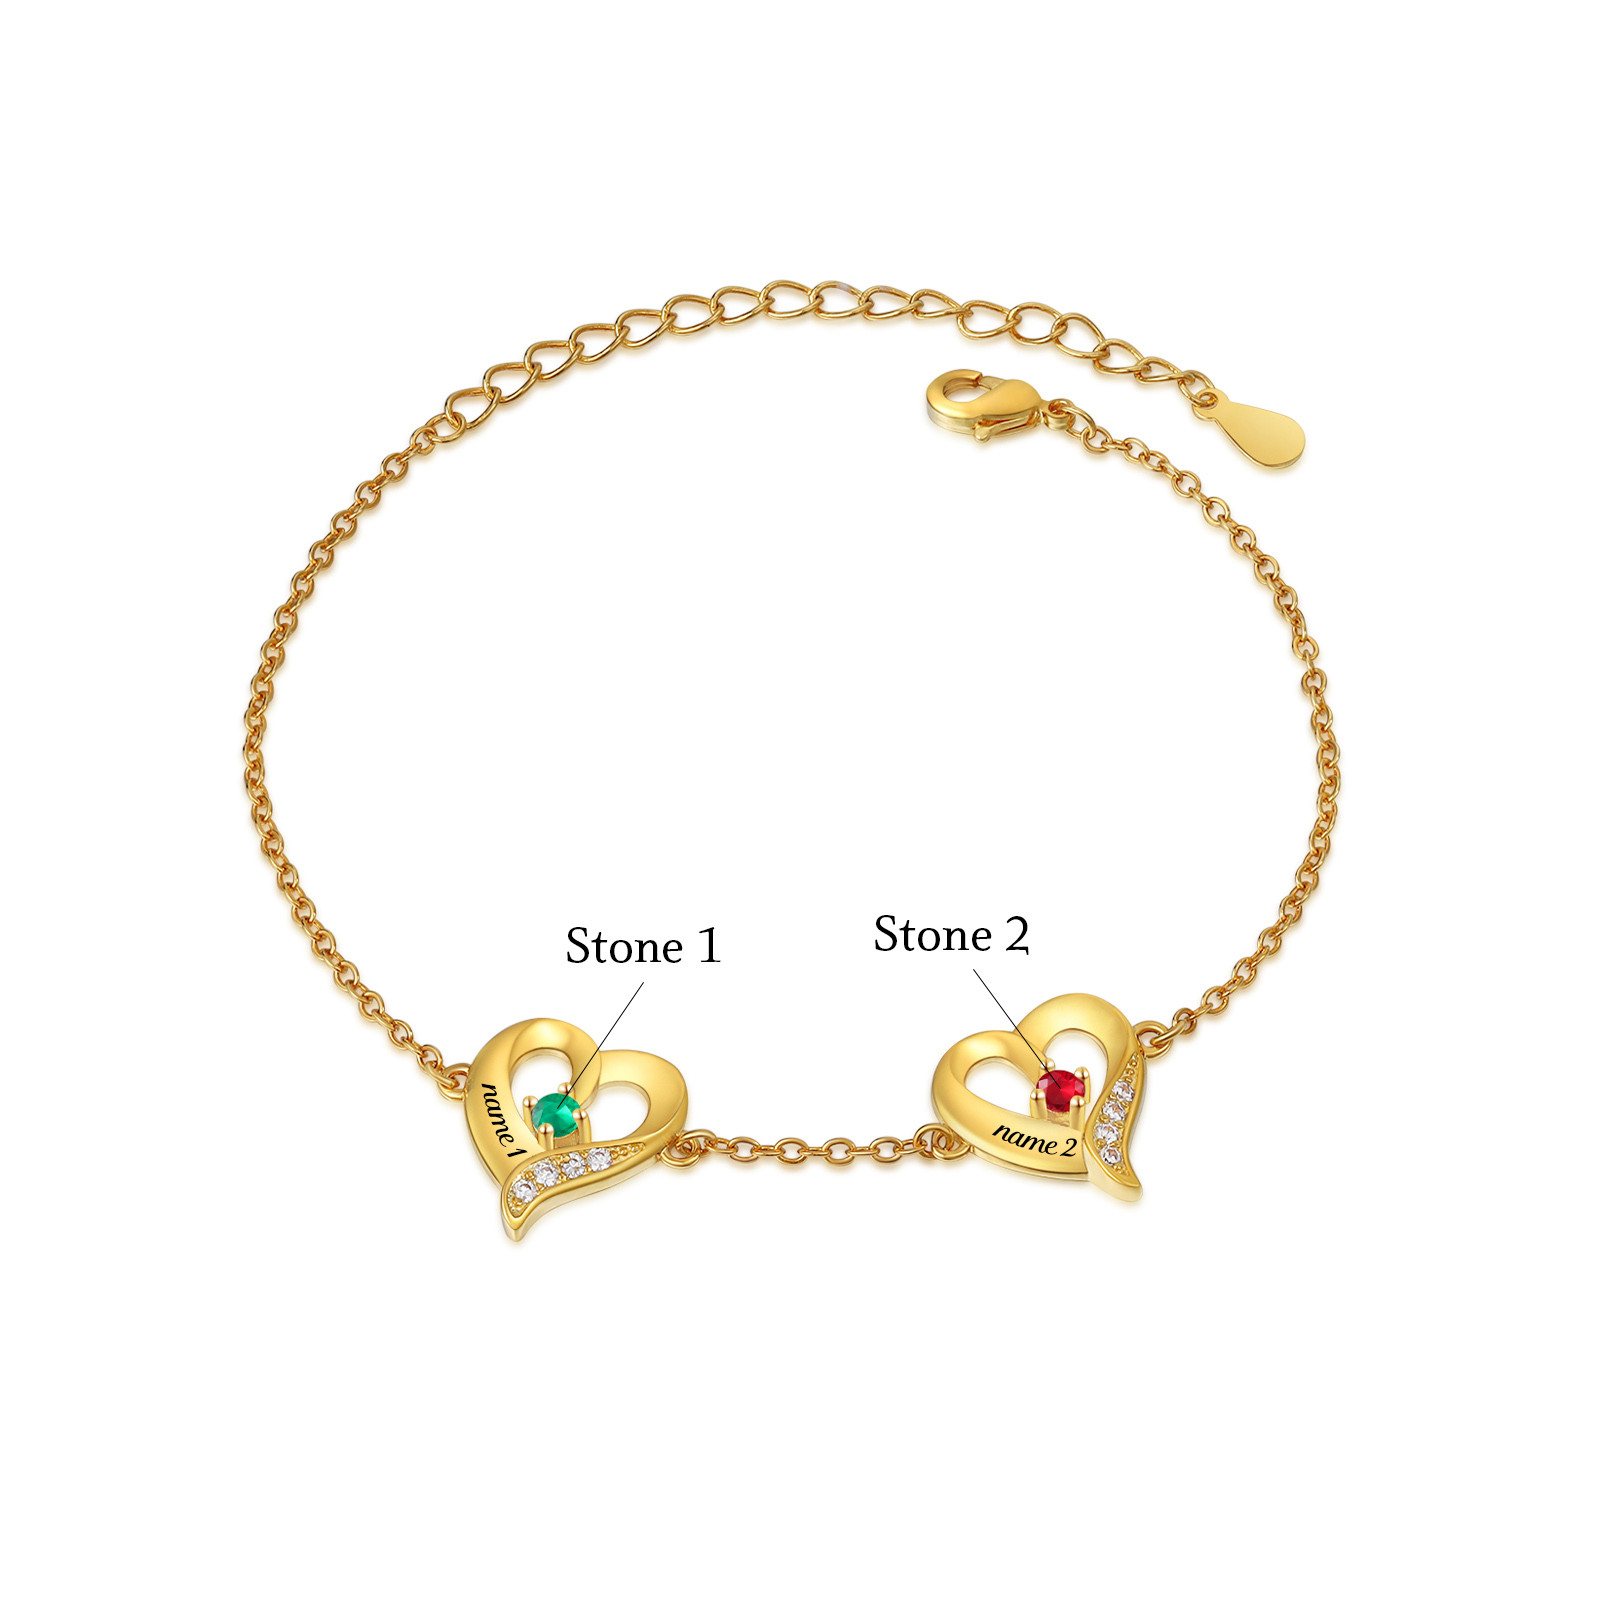 2 Names-Personalized Heart Bracelet With 2 Birthstones Engraved Names Bangle For Her